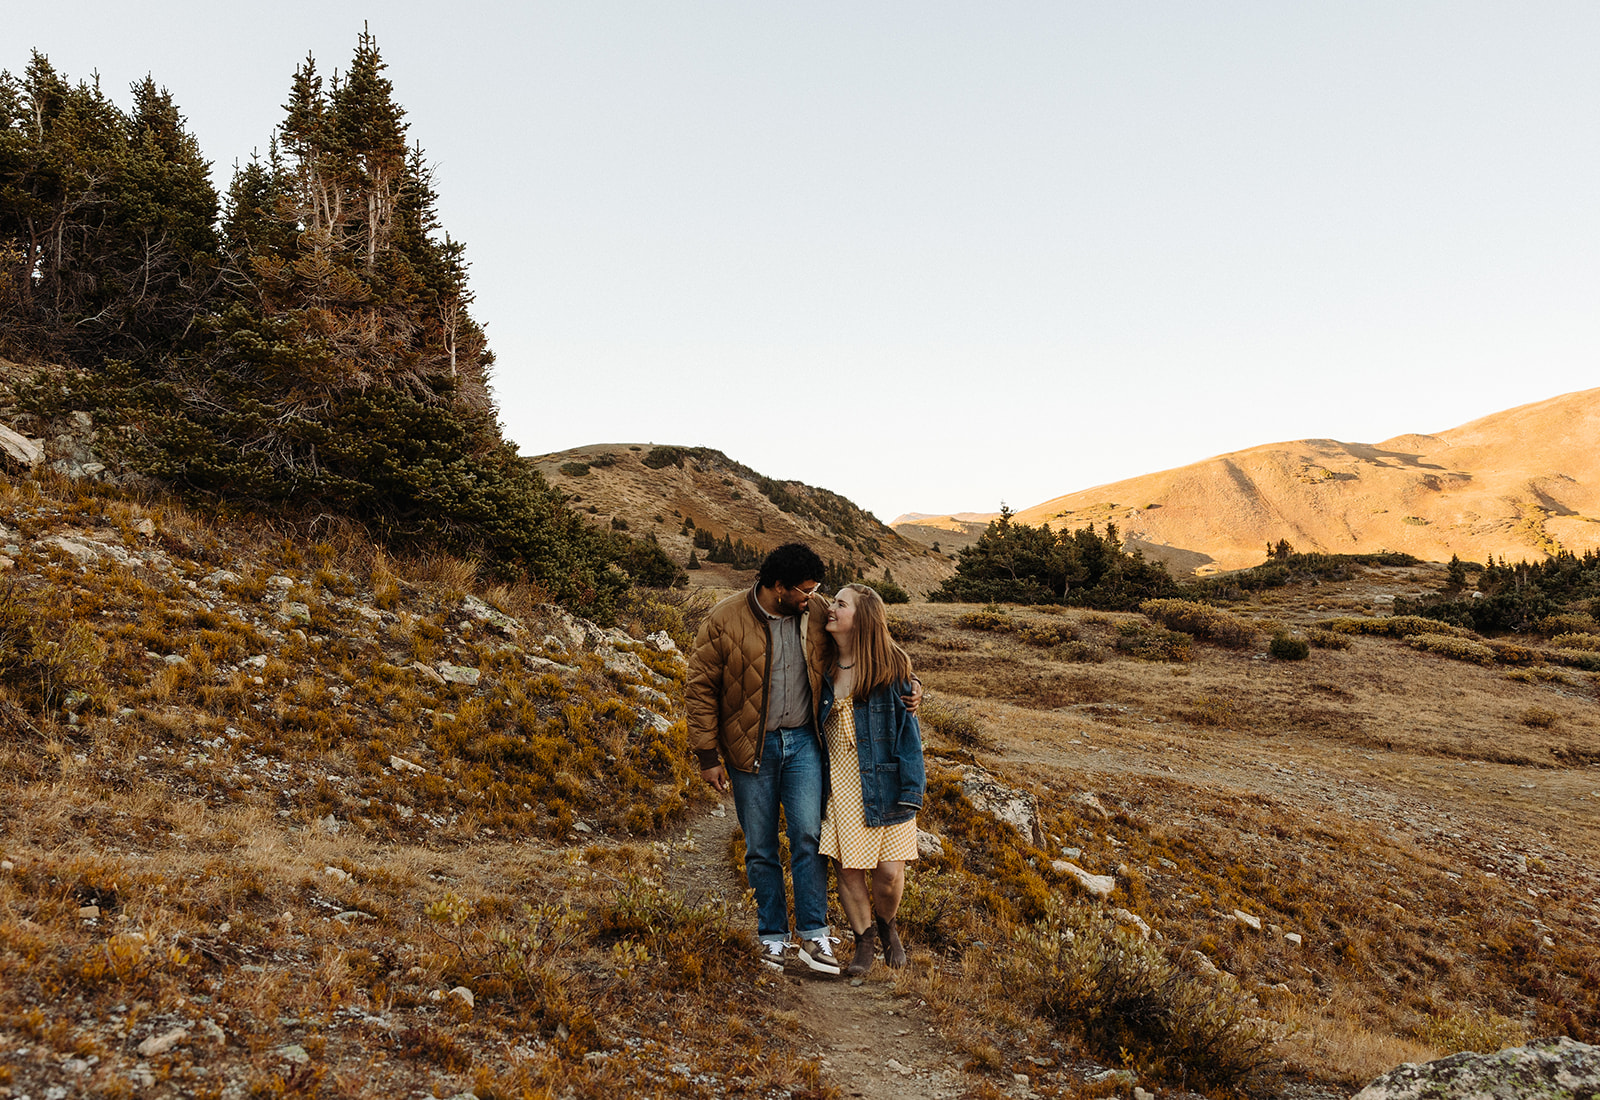 The mountains in the background have turned more golden and the couple walks, sharing a sweet moment.